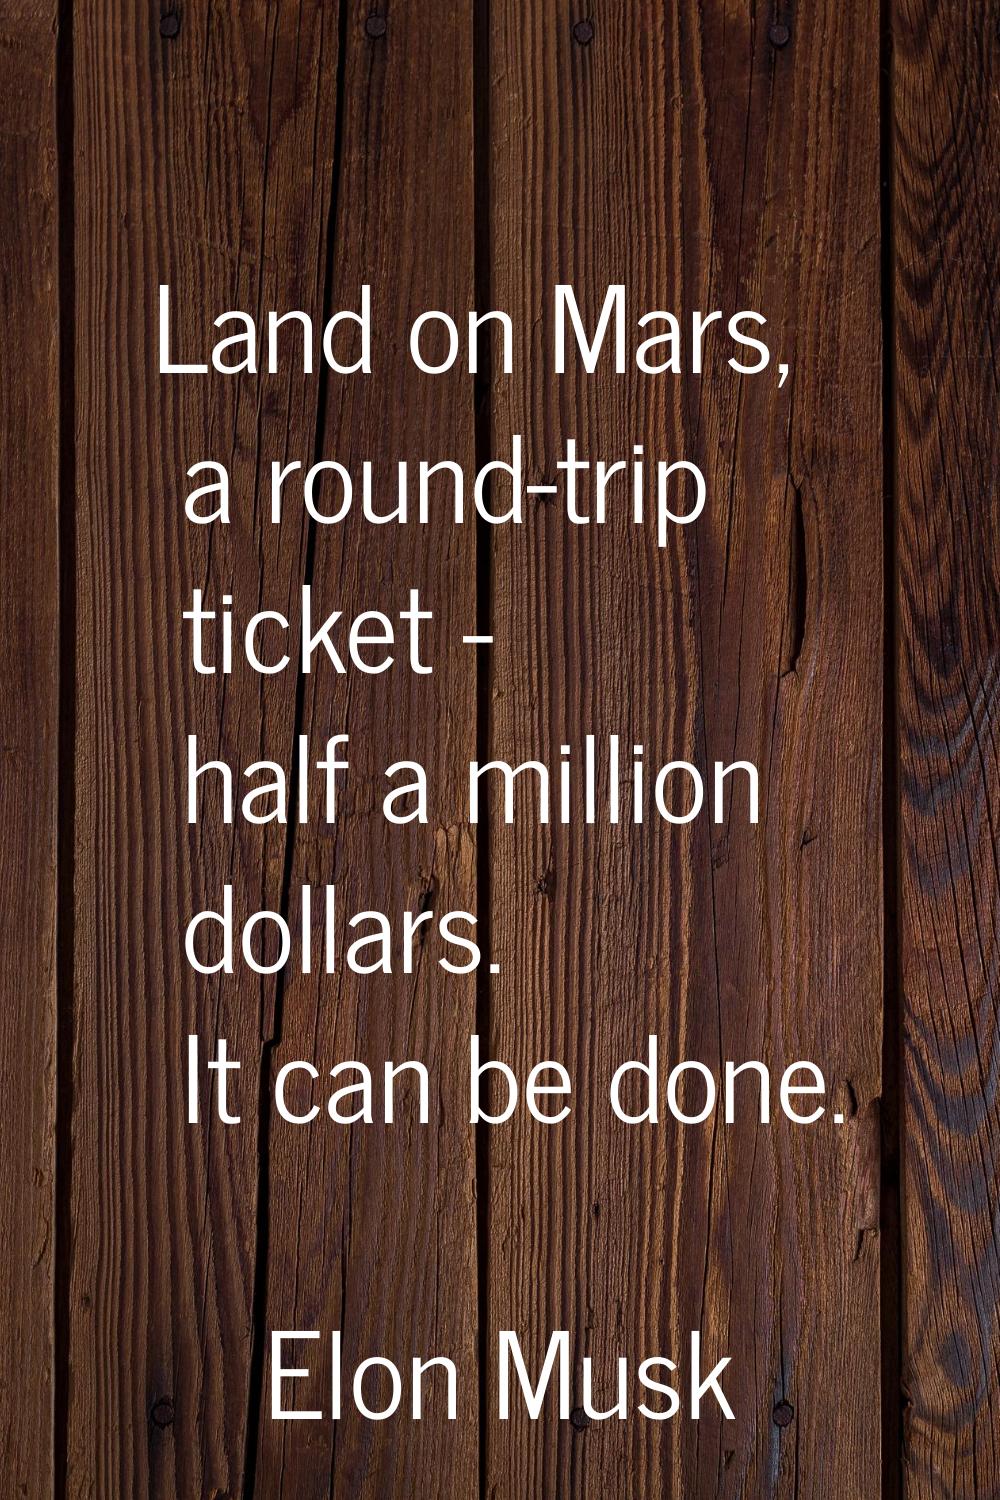 Land on Mars, a round-trip ticket - half a million dollars. It can be done.